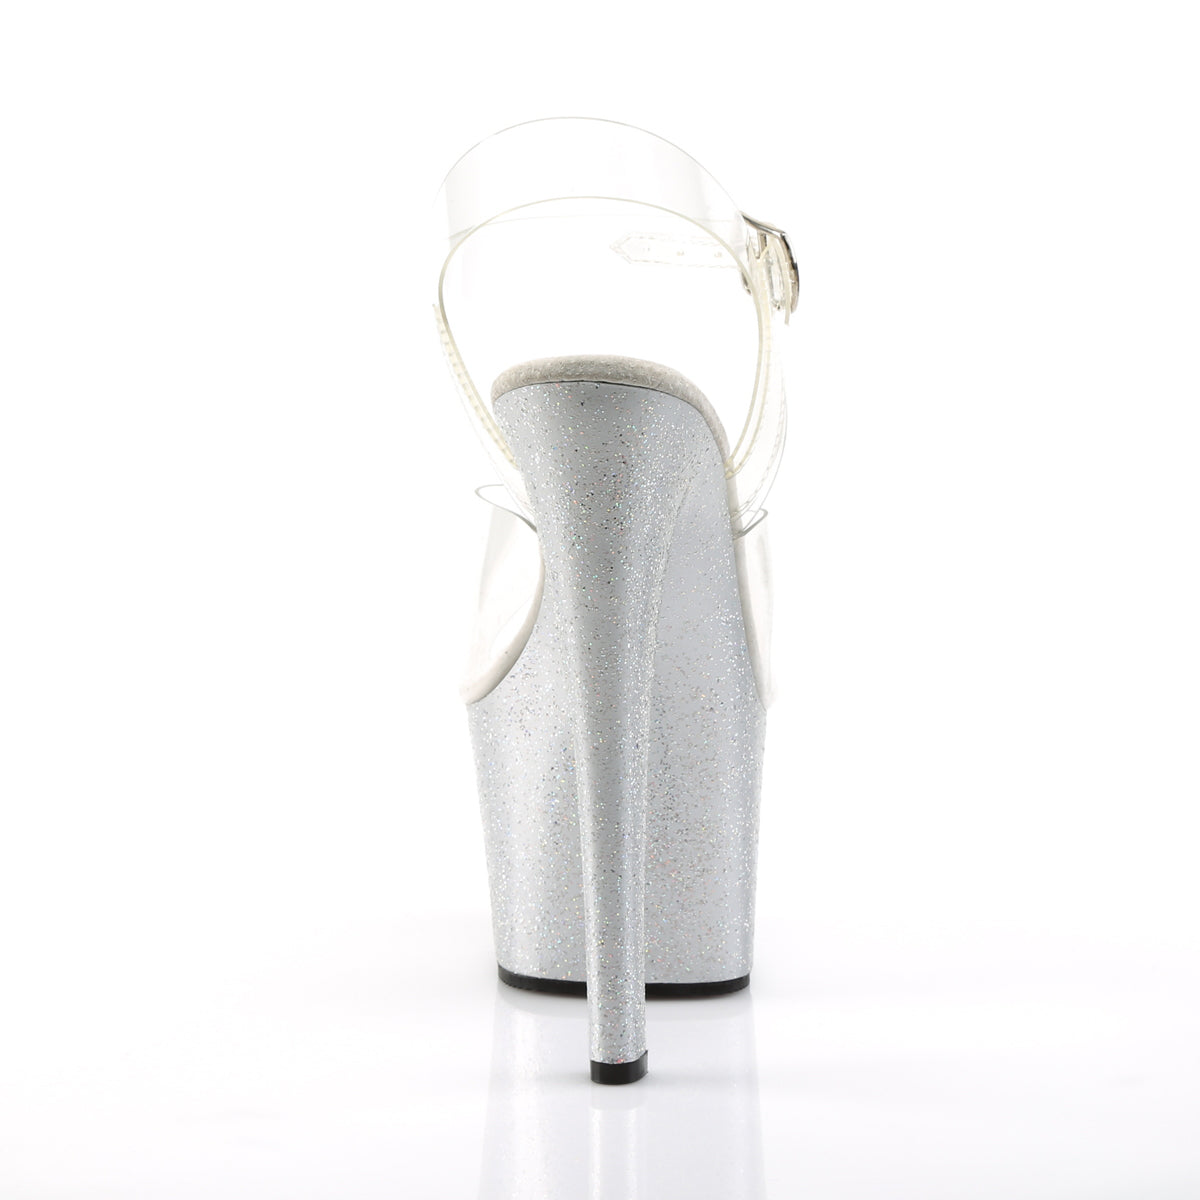 SKY-308MG 7" Heel Clear and Silver Pole Dancing Platforms-Pleaser- Sexy Shoes Fetish Footwear